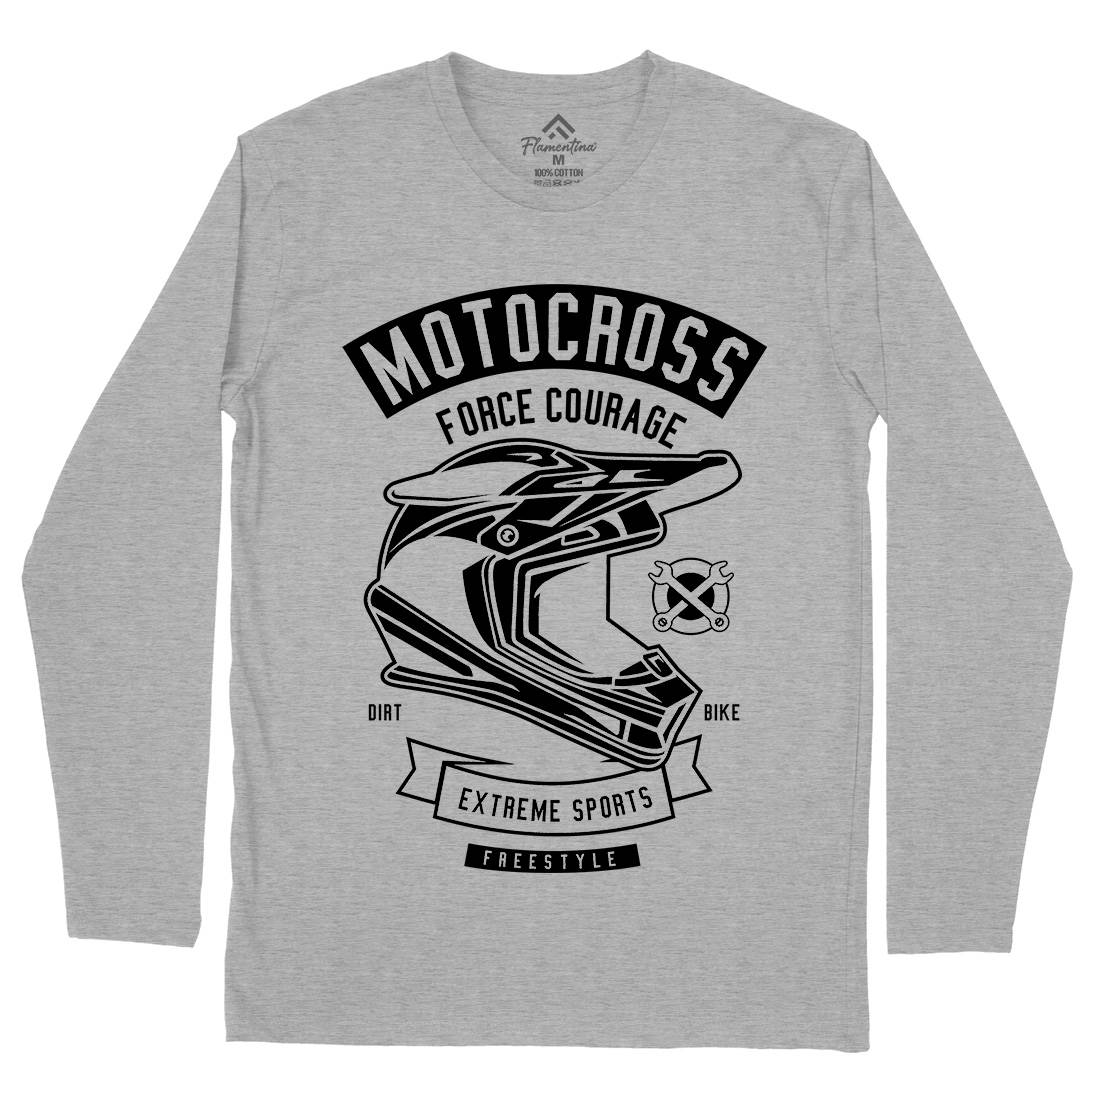 Motocross Force Courage Mens Long Sleeve T-Shirt Motorcycles B576